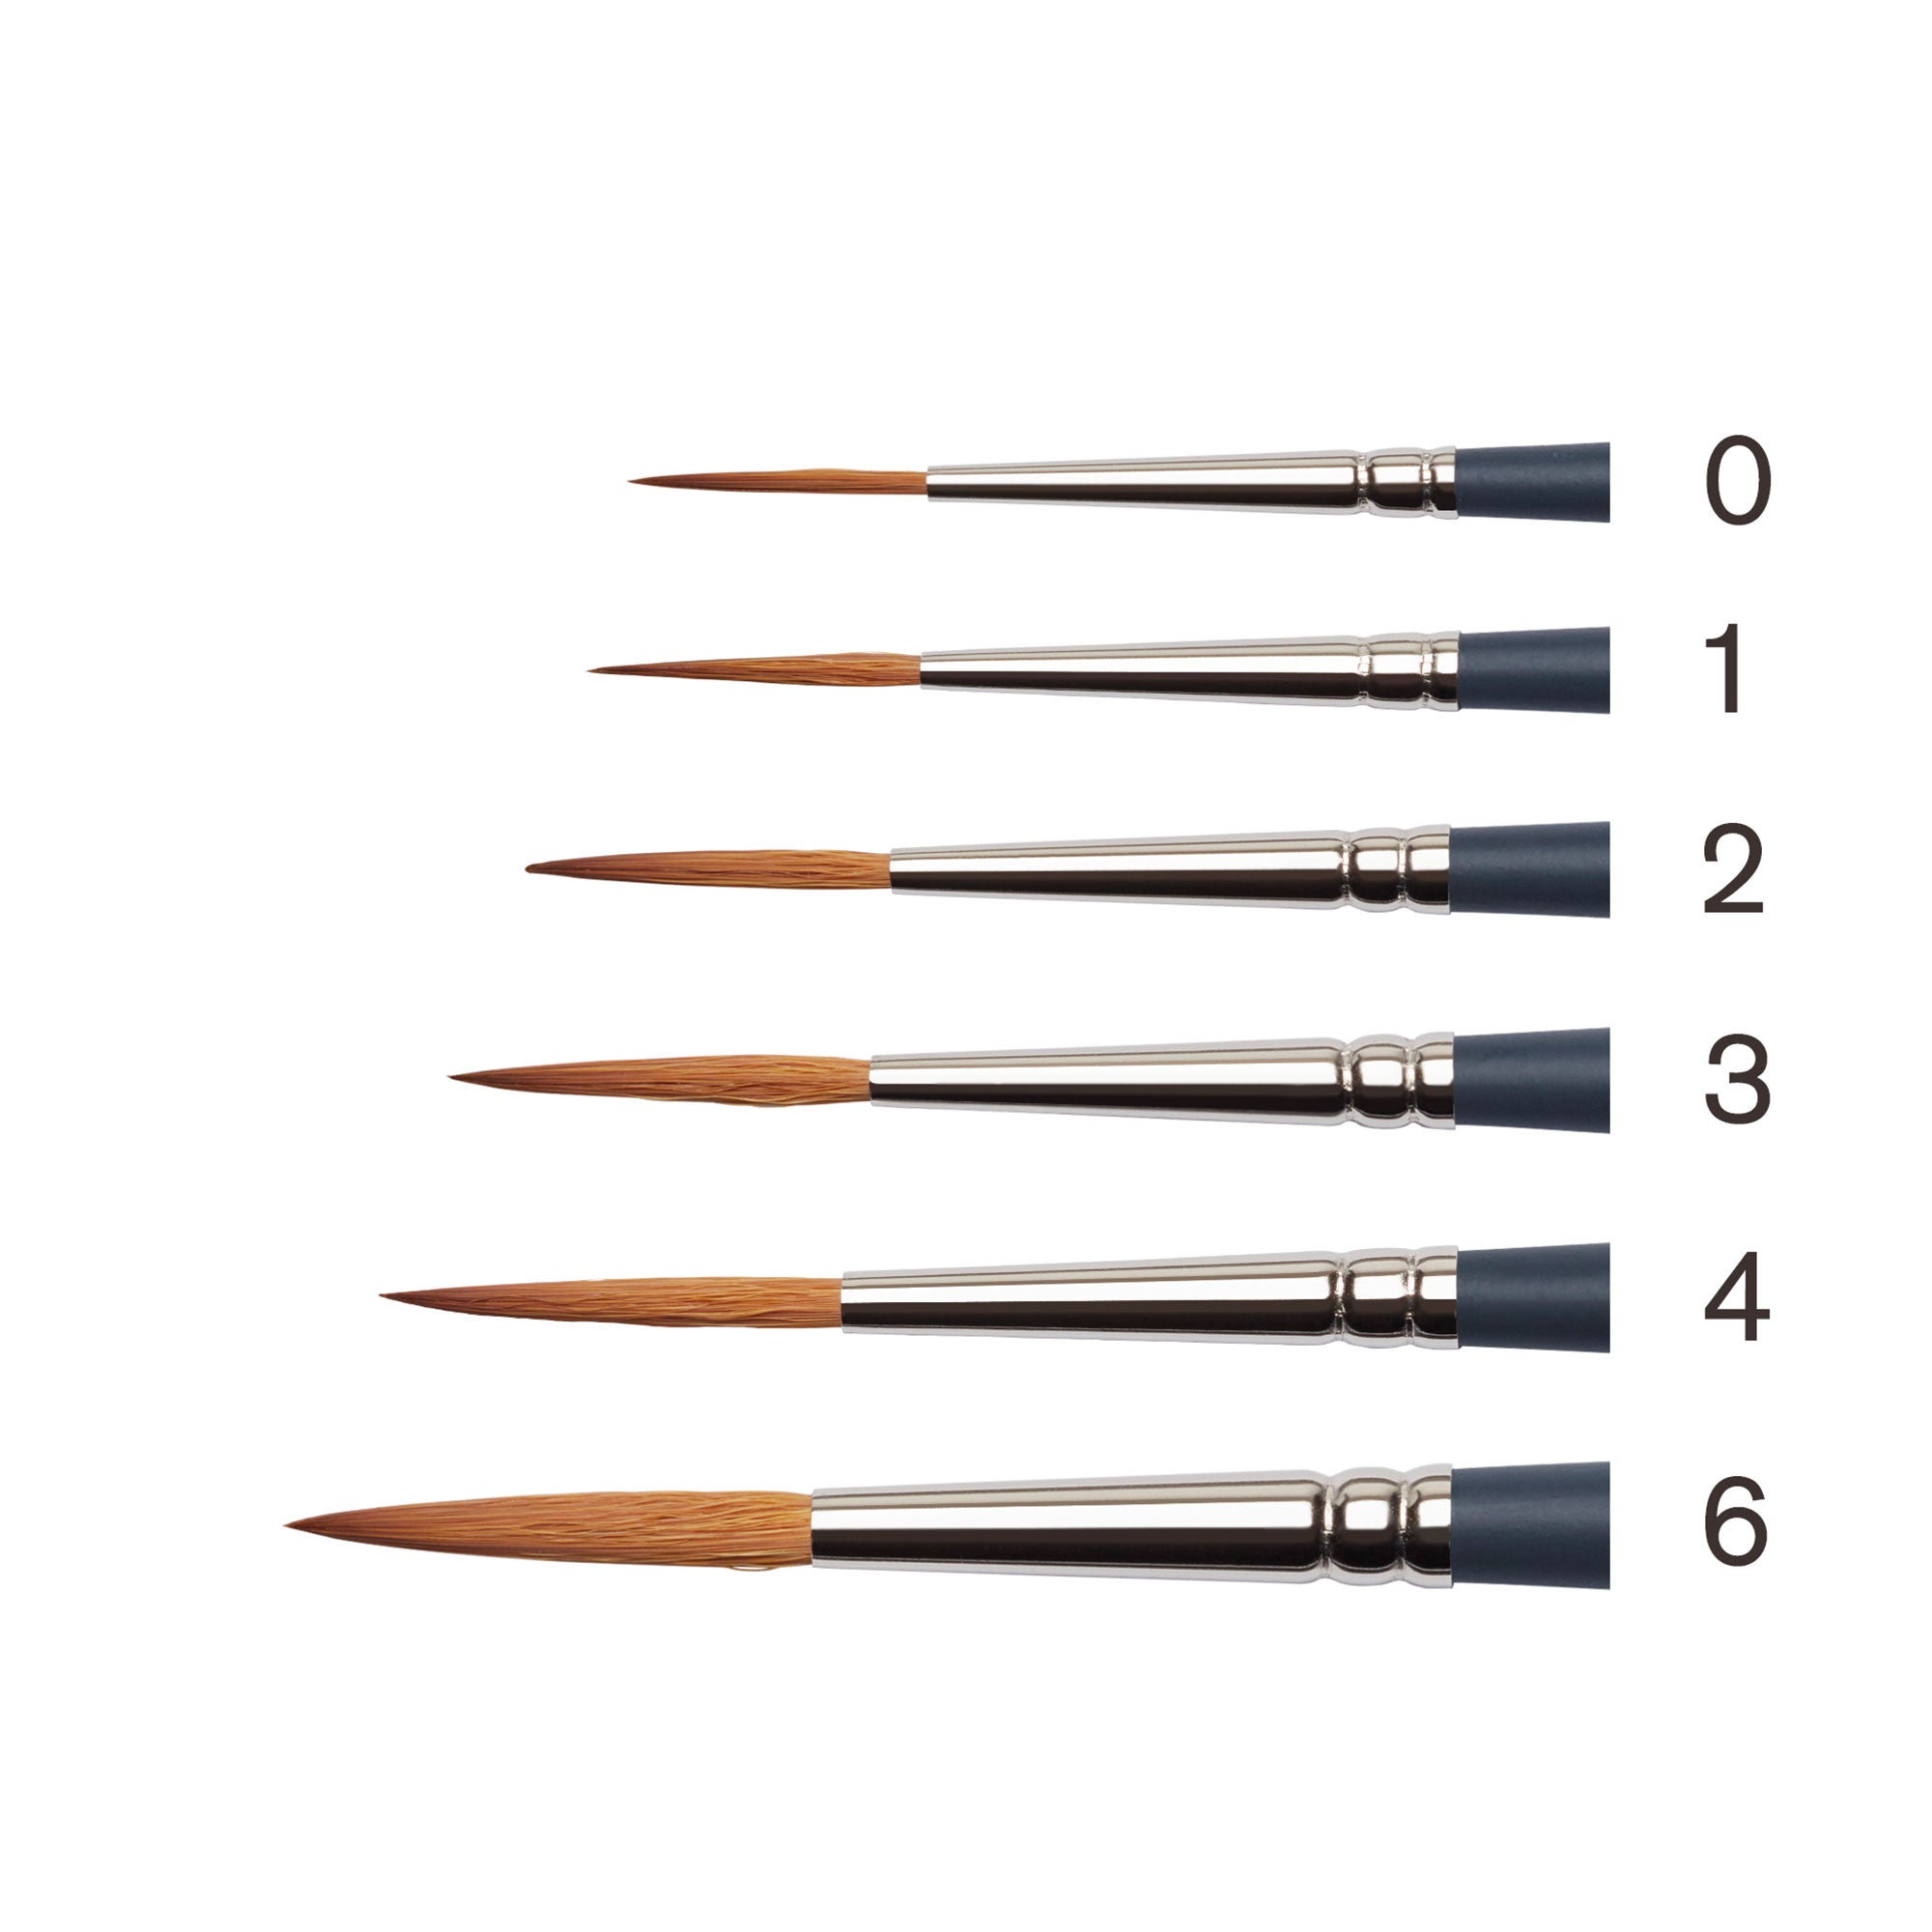 Set of 6 Sable Artist Brushes - 'The Oxford' Round Head Brush